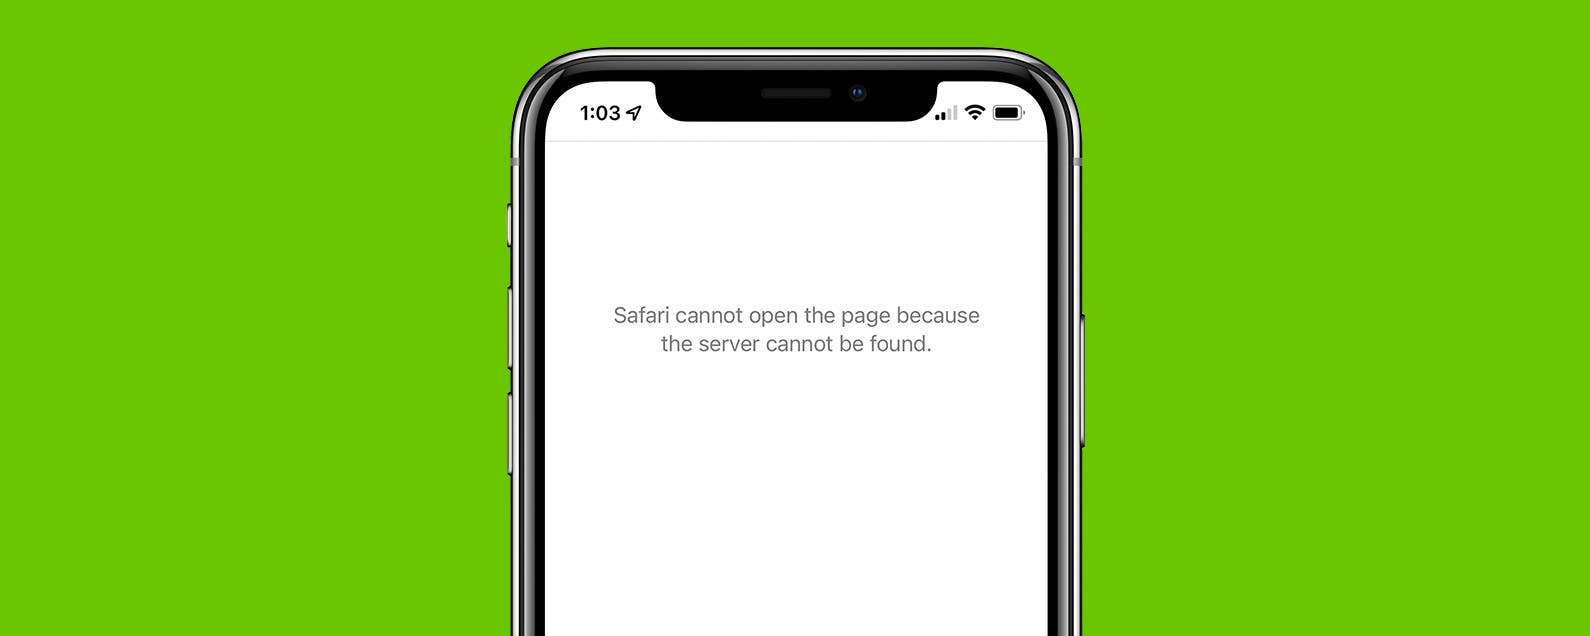 safari won't open page not secure